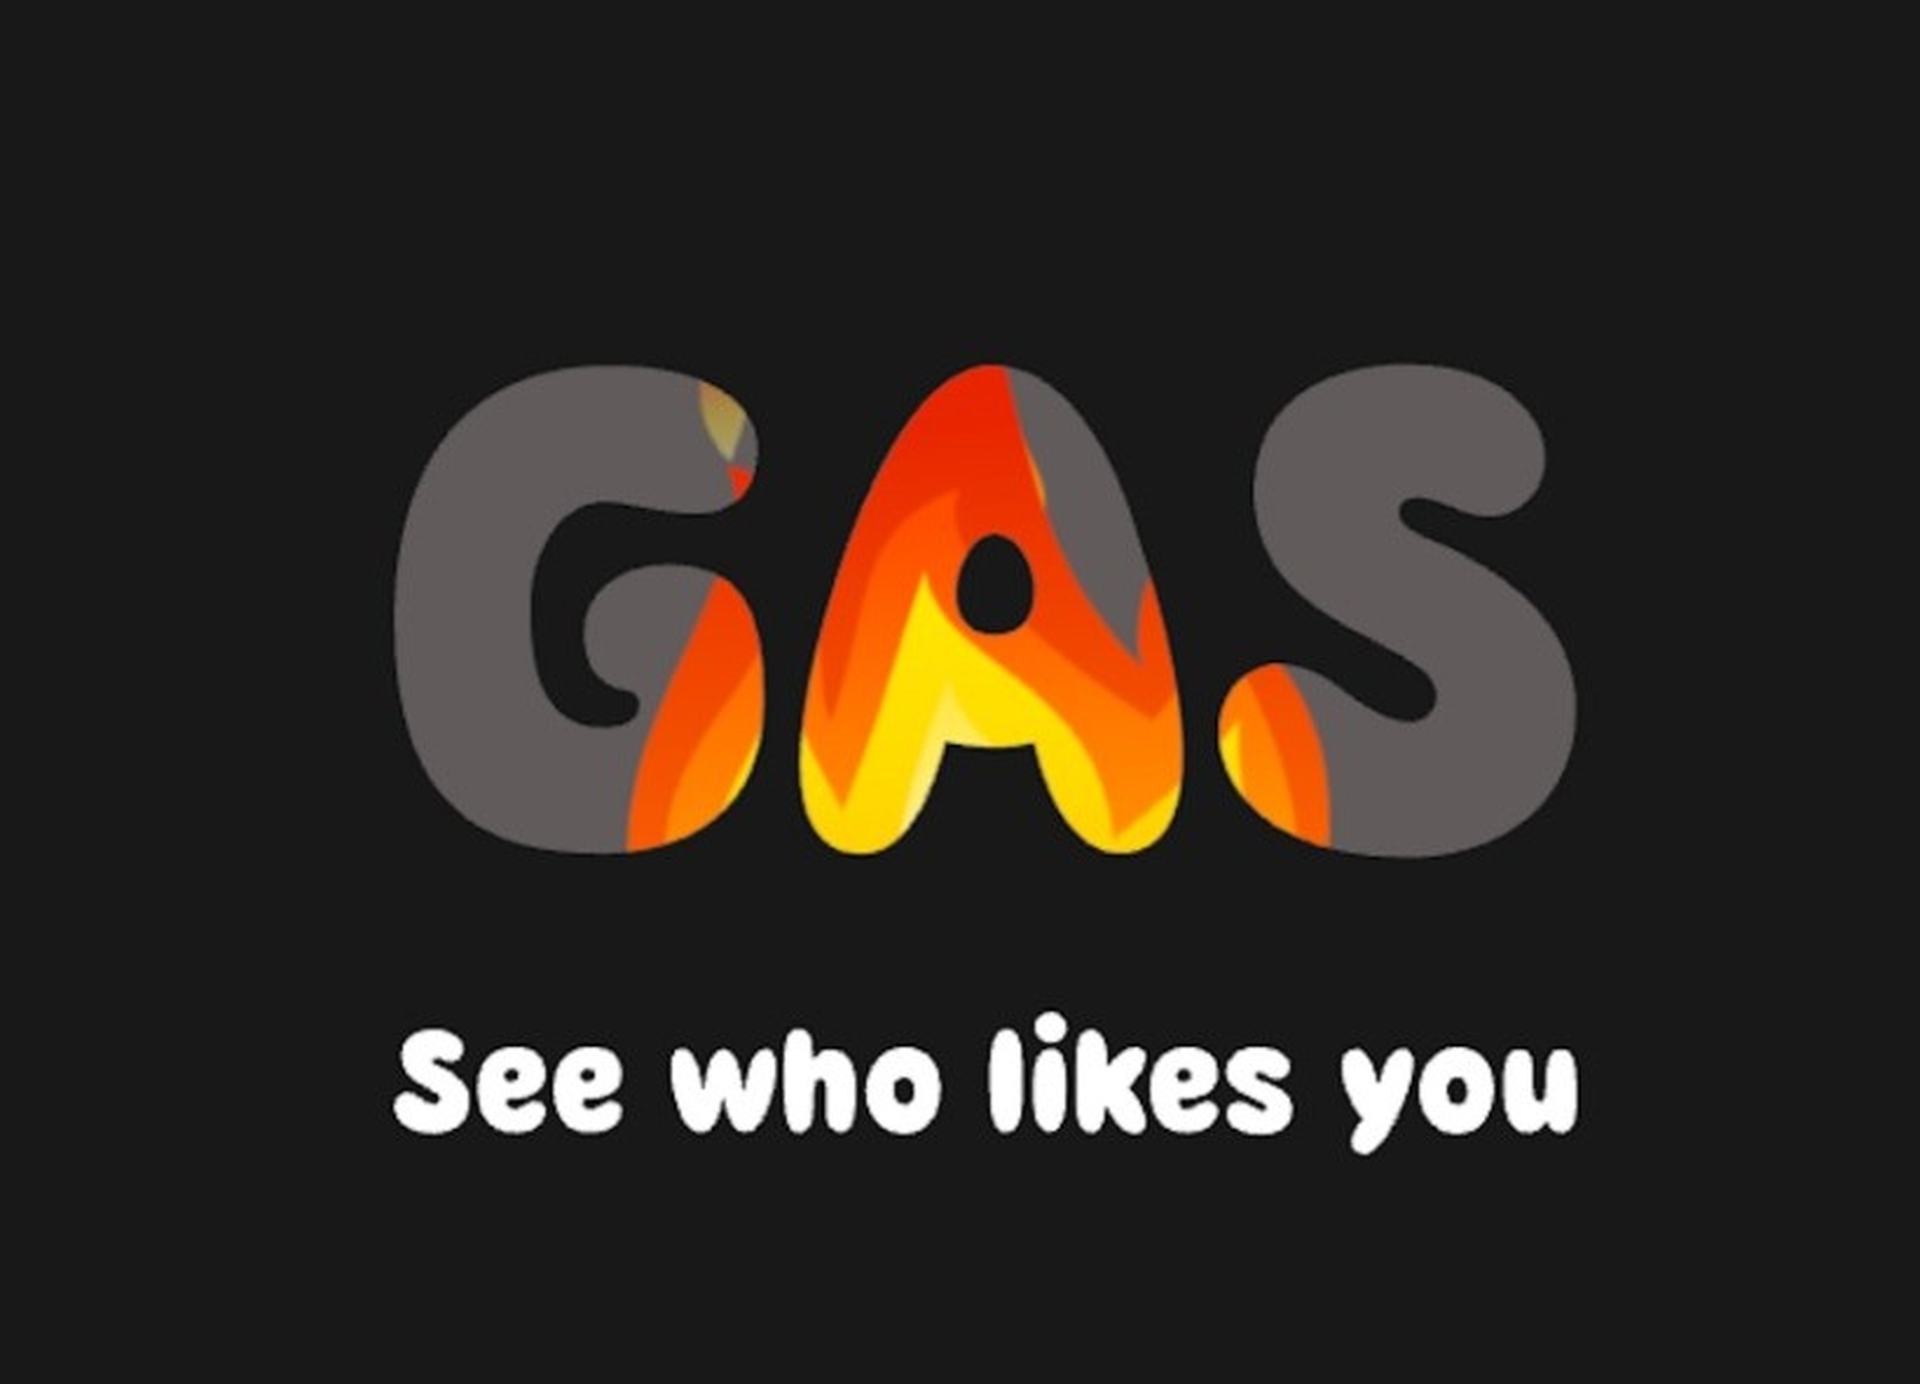 In this article, we are going to be covering Gas social media explained, which is a social media app that is geared towards teenagers and allows them to ask...